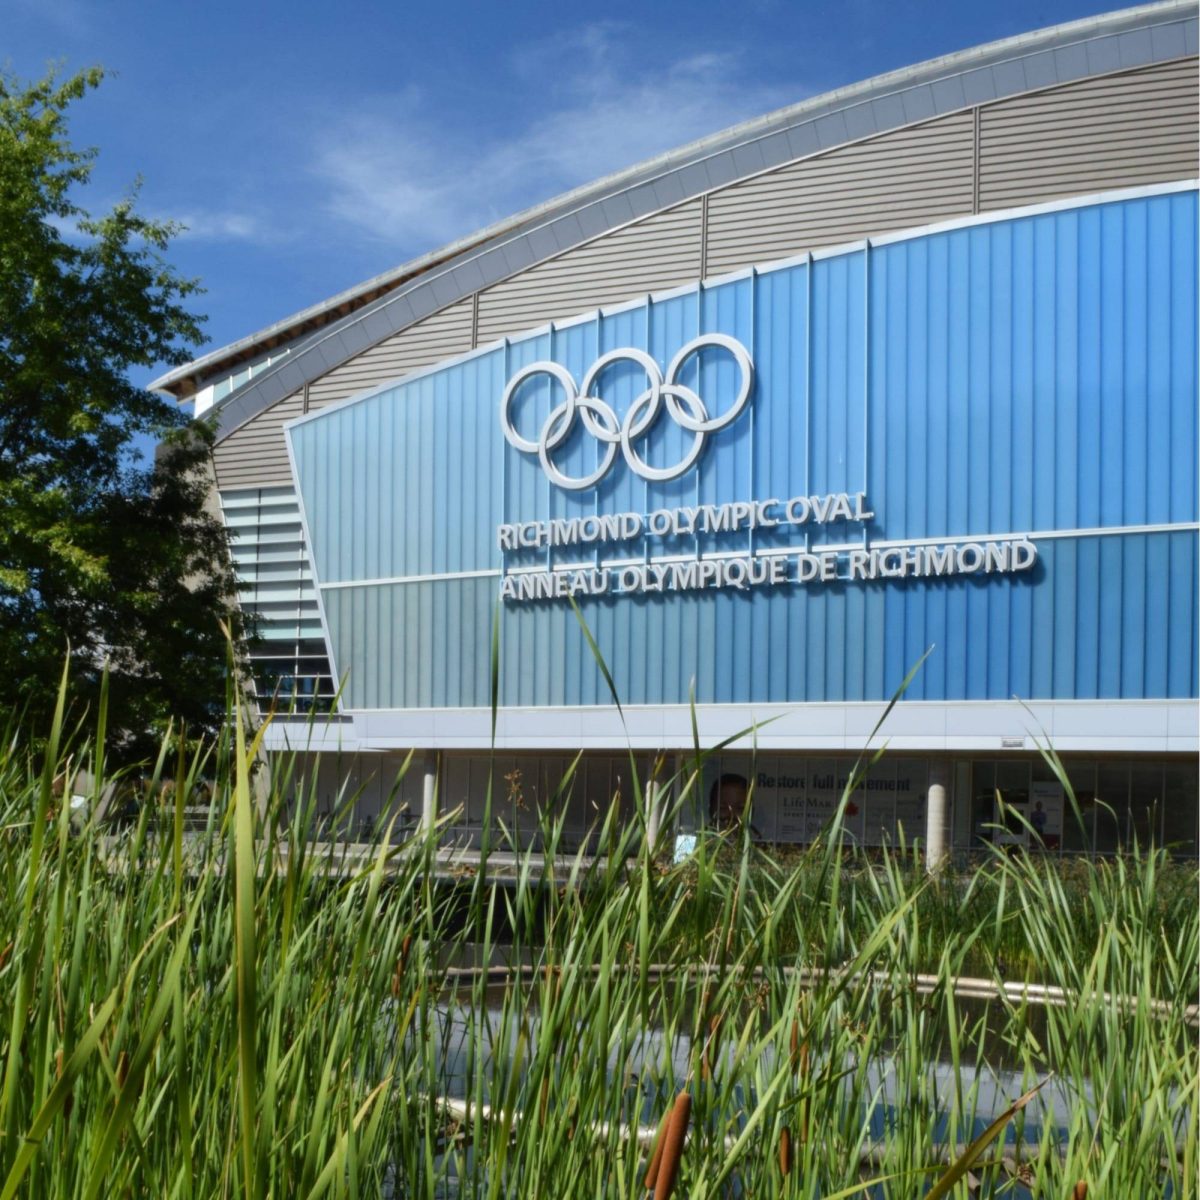 Richmond Olympic Oval an indoor multi-sport arena & fitness facility in Richmond built with skating rinks, climbing wall, rowing tank